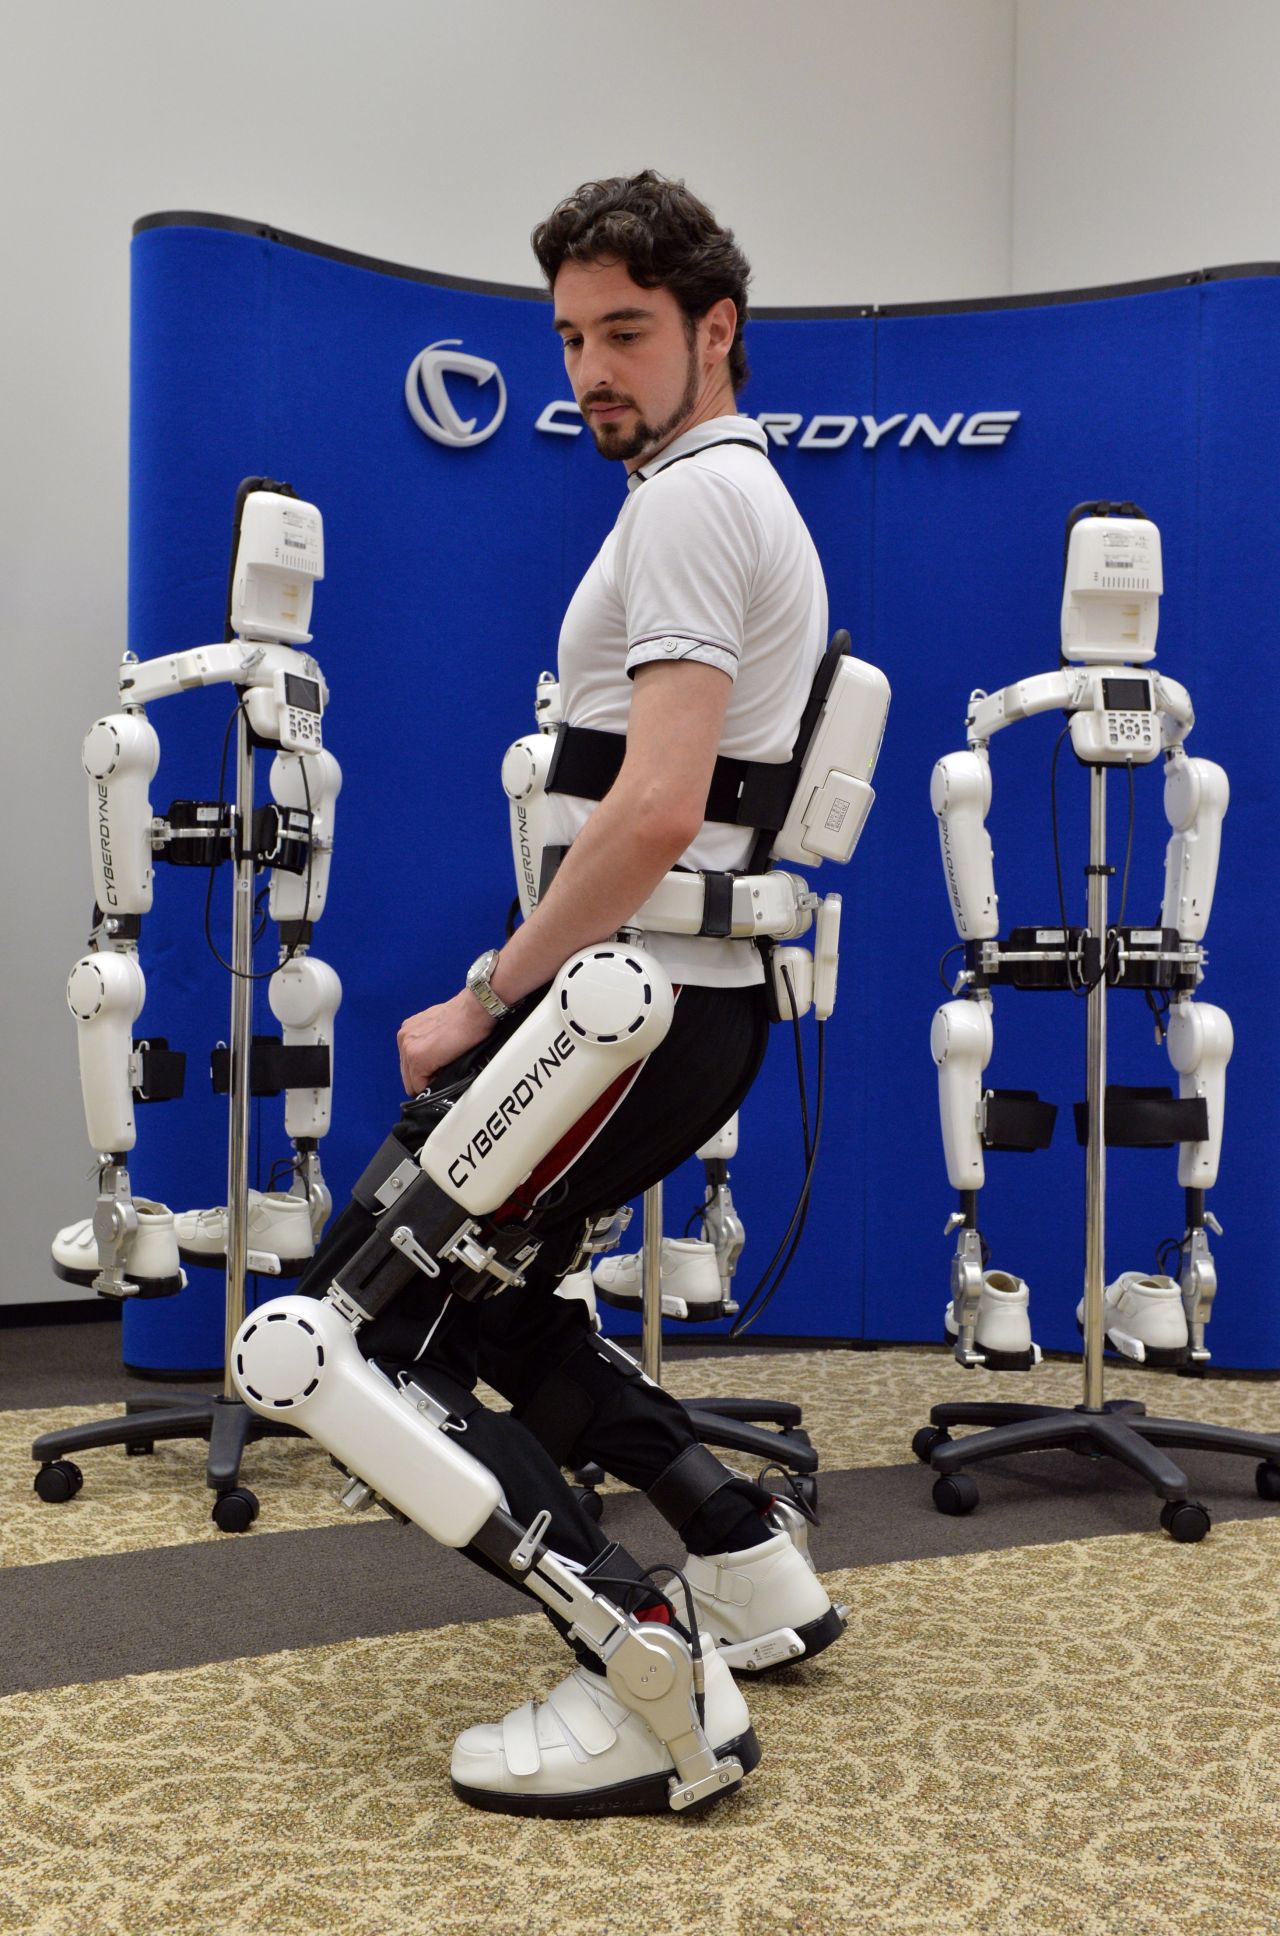 The power-assisted exoskeleton is one of a number of devices targeting the growing consumer segment of elderly people.